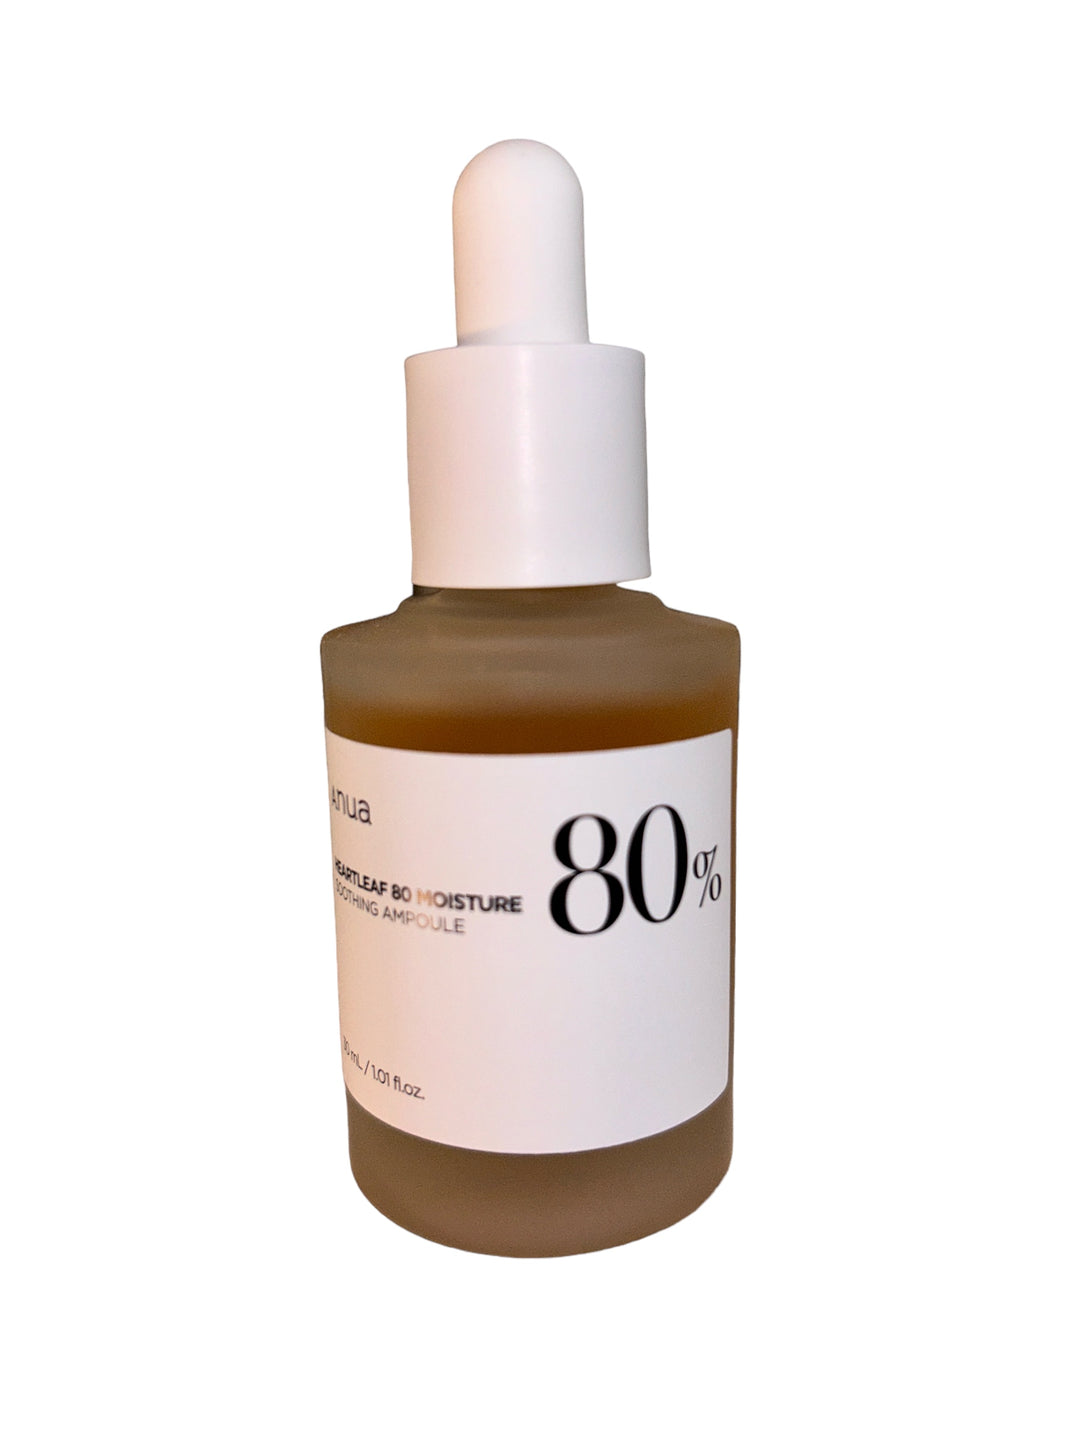 Anua 80% Heartleaf Moisture Soothing Ampoule